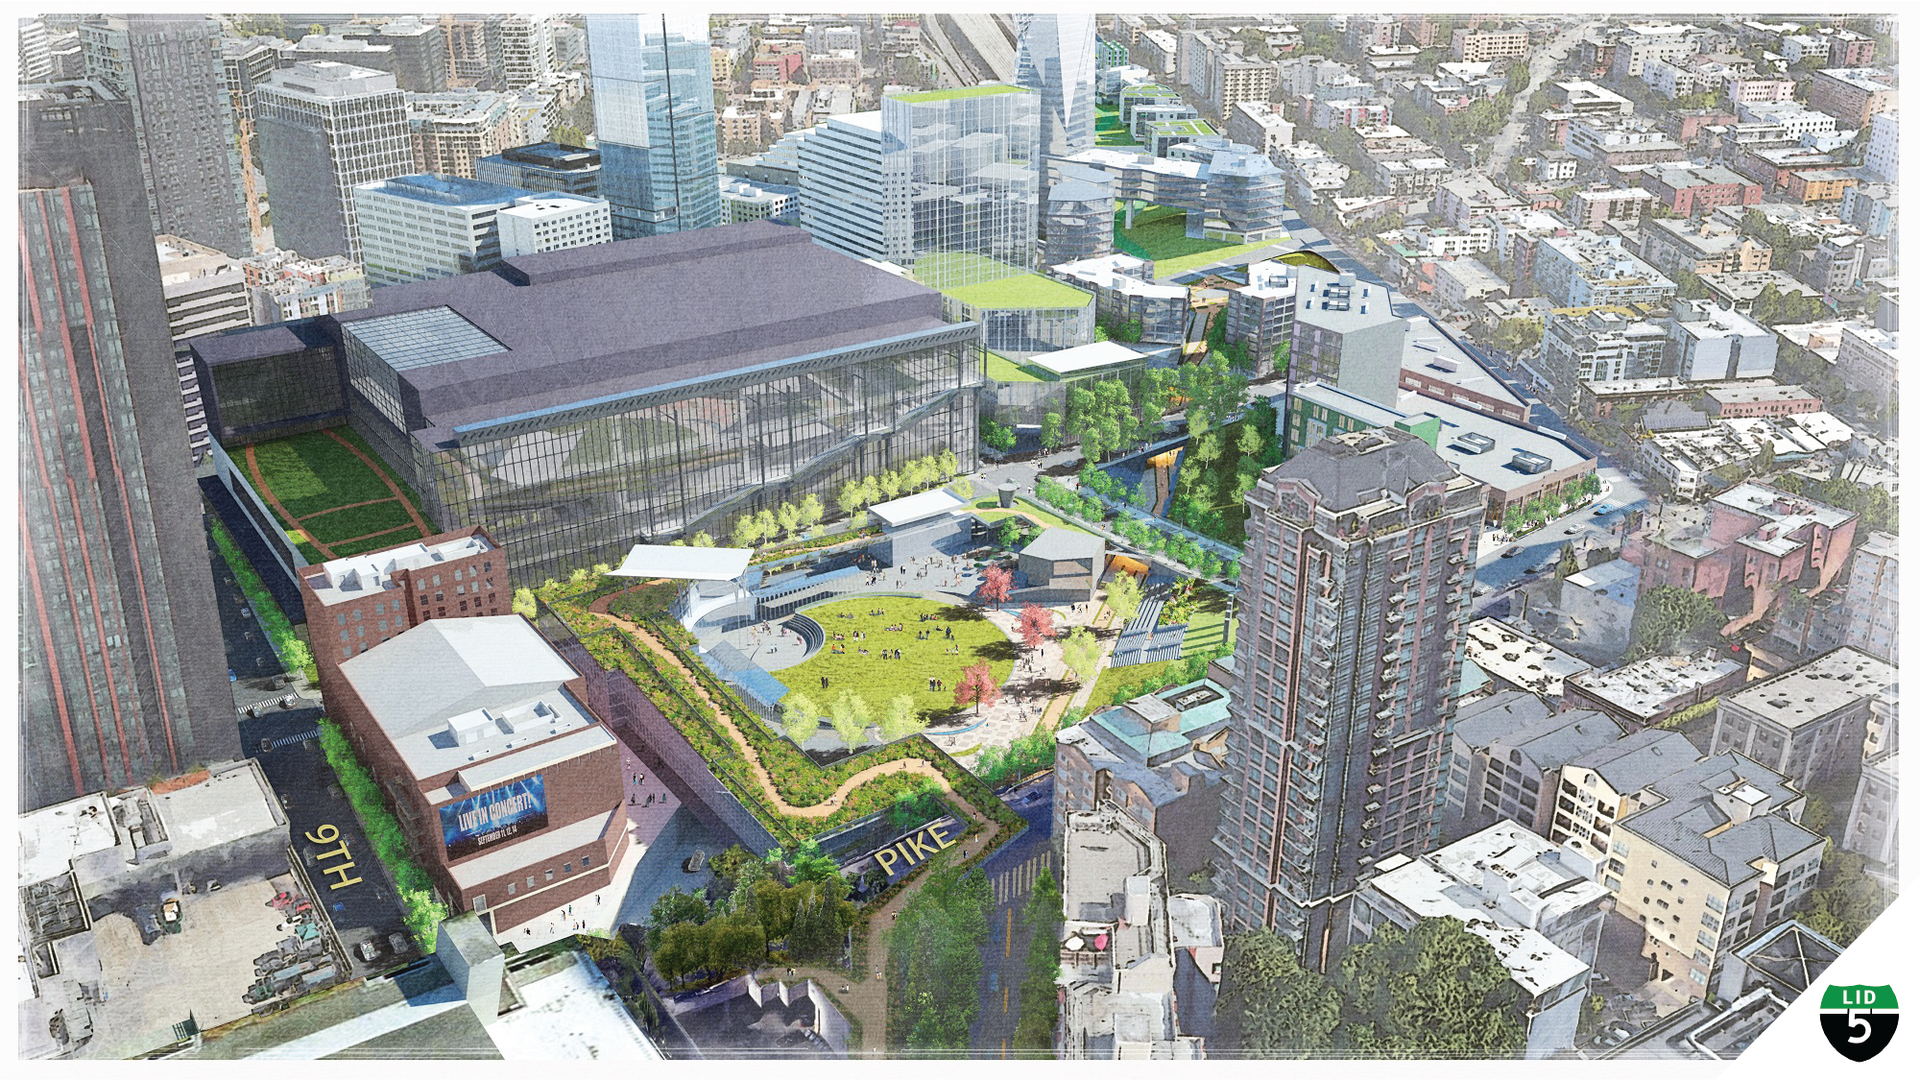 A view of downtown Seattle with a rendering of a green park space over interstate 5. 